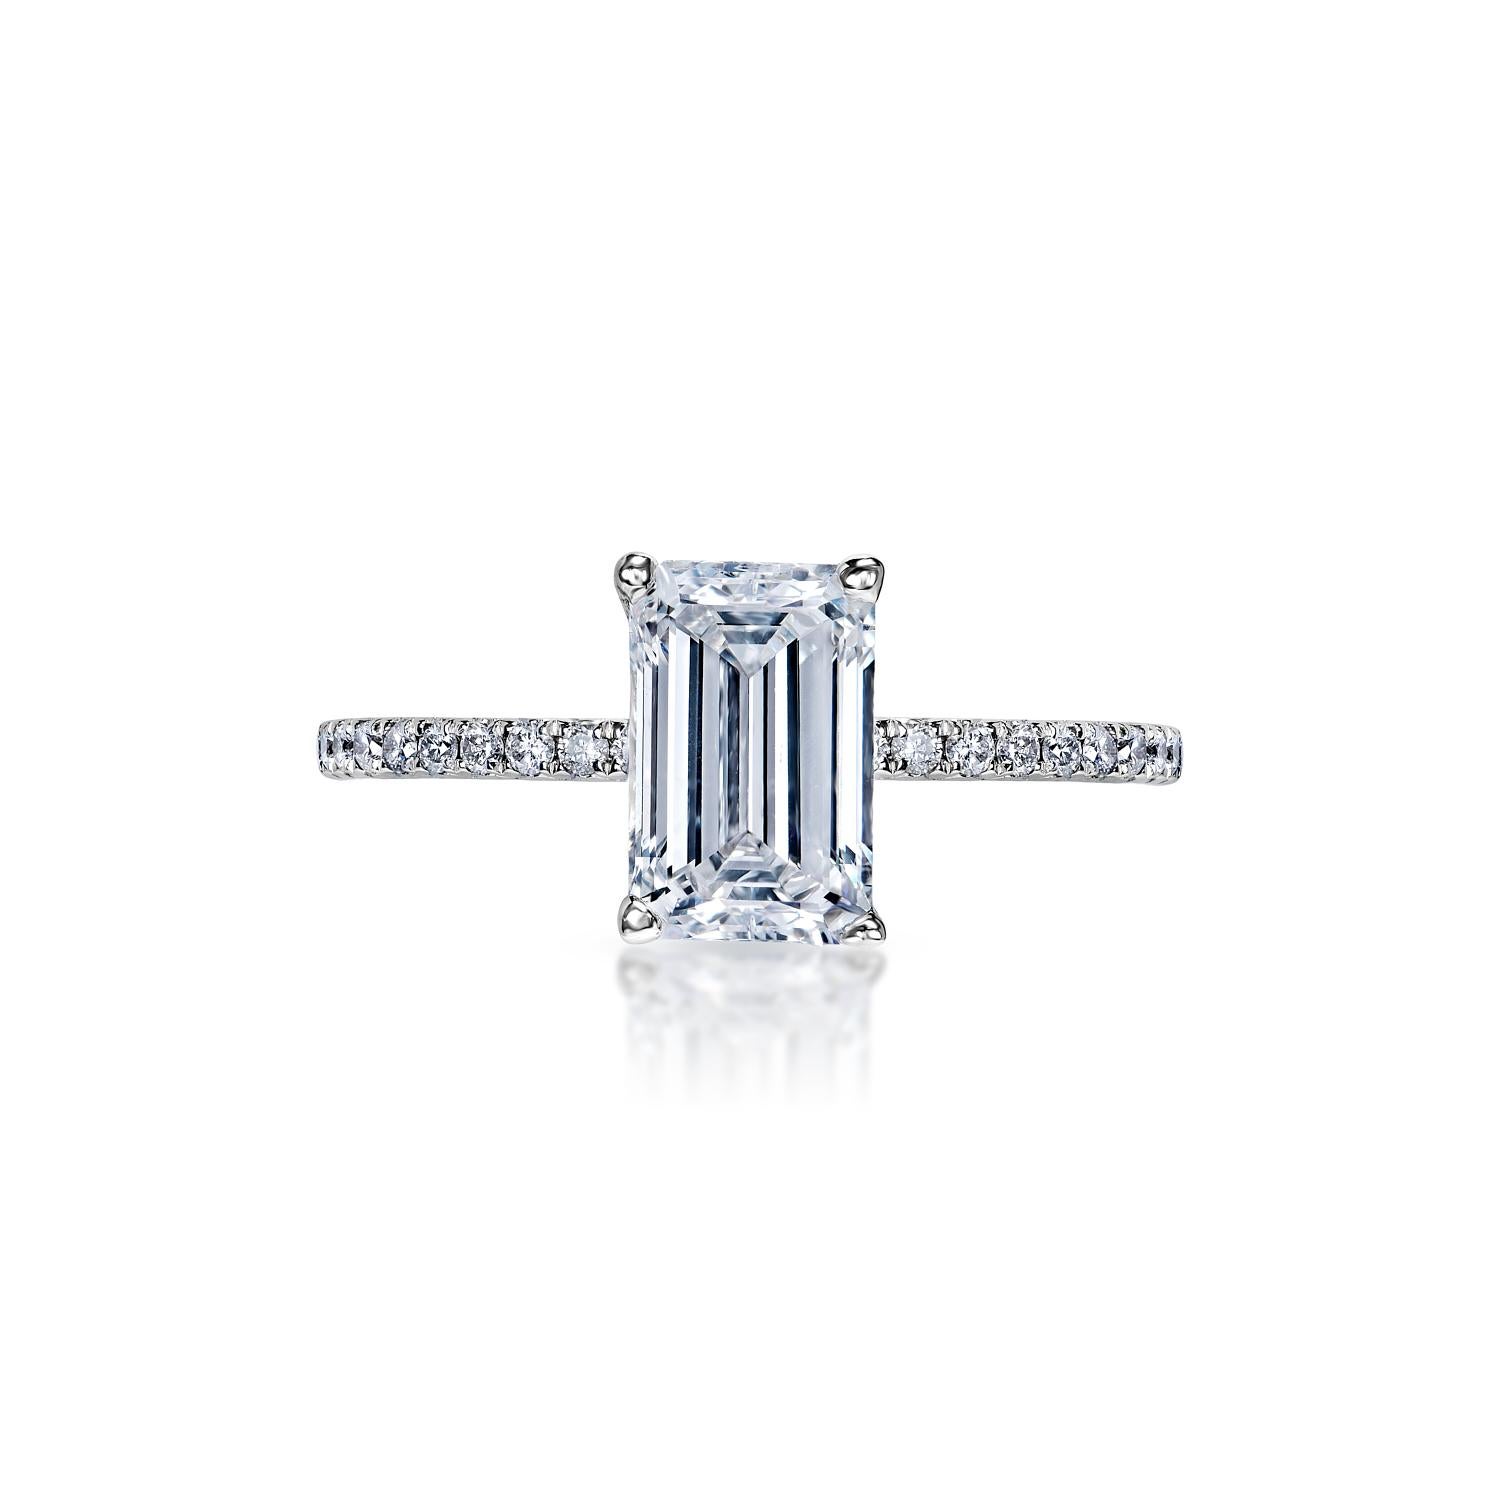 Mariam 2 Carat E VS1 Emerald Cut Diamond Engagement Ring in 18k White Gold by Mike Nekta

Center Diamond:

Carat Weight: 1.50 Carat
Color : E
Clarity: VS1*
Style: Emerald Cut
Feather Filled- Spl Care Req'd

Ring:
Metal: 18 Karat White Gold
Setting: